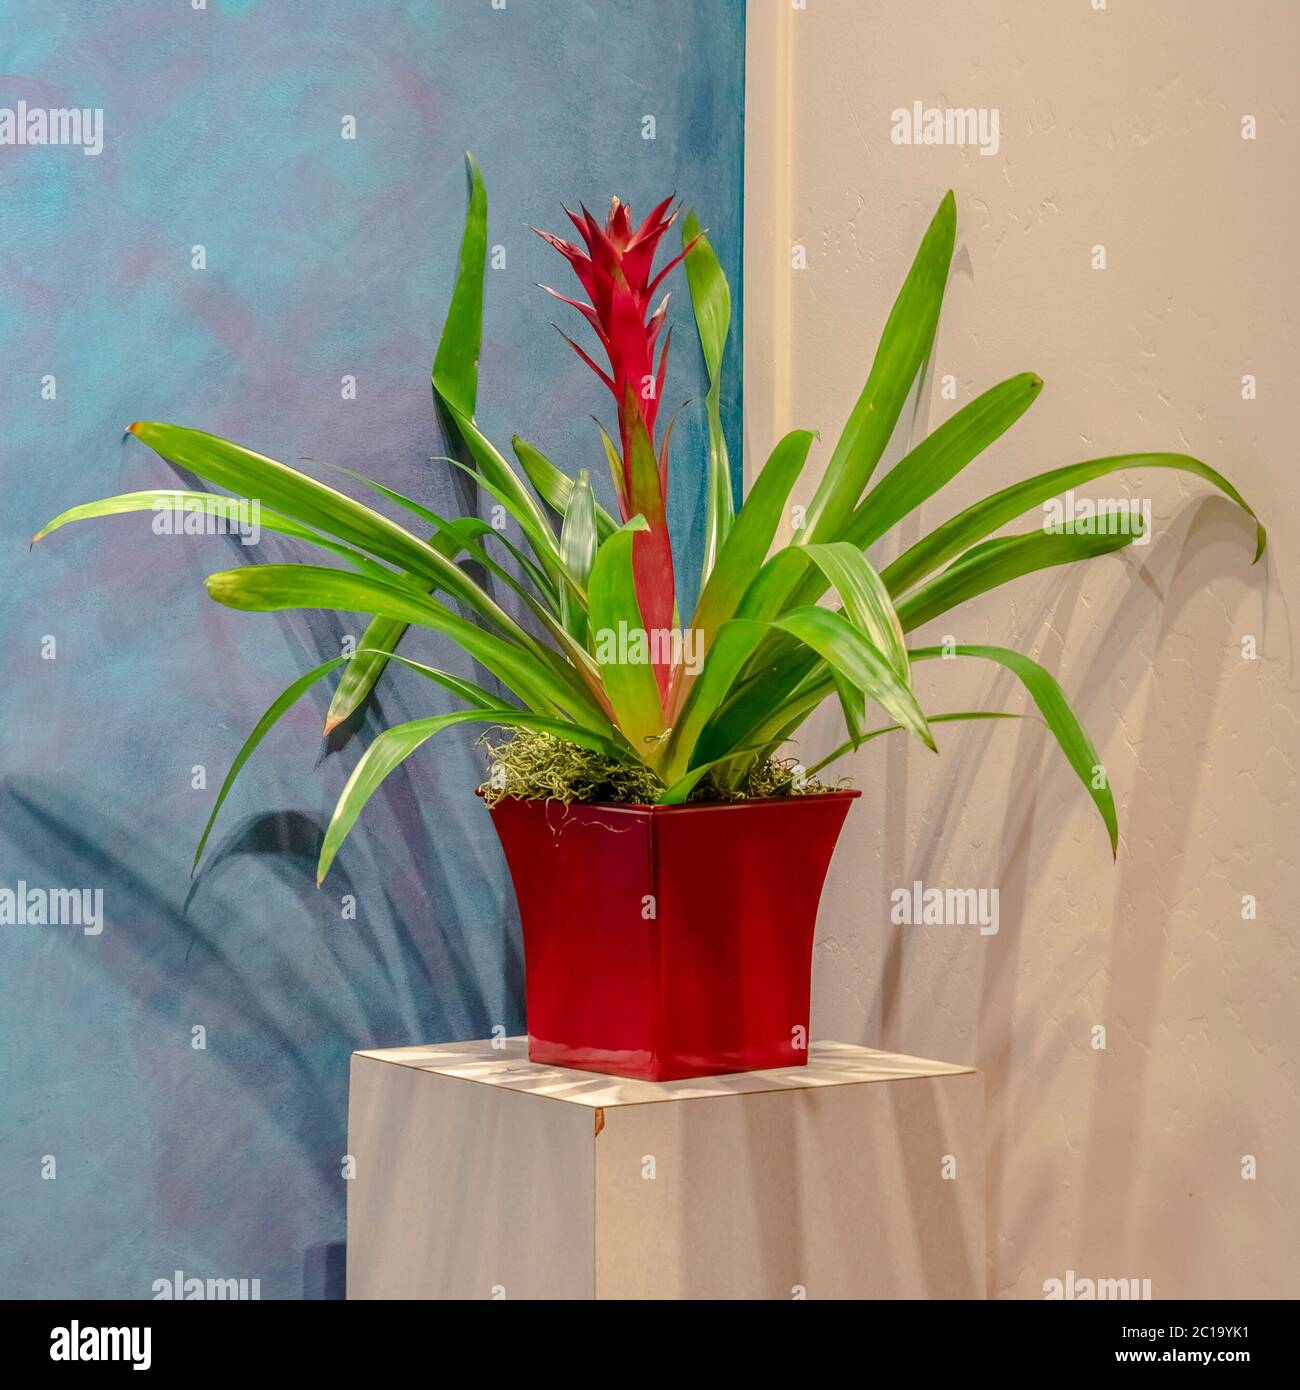 Square Potted bromeliad with colorful red flower interior Stock Photo